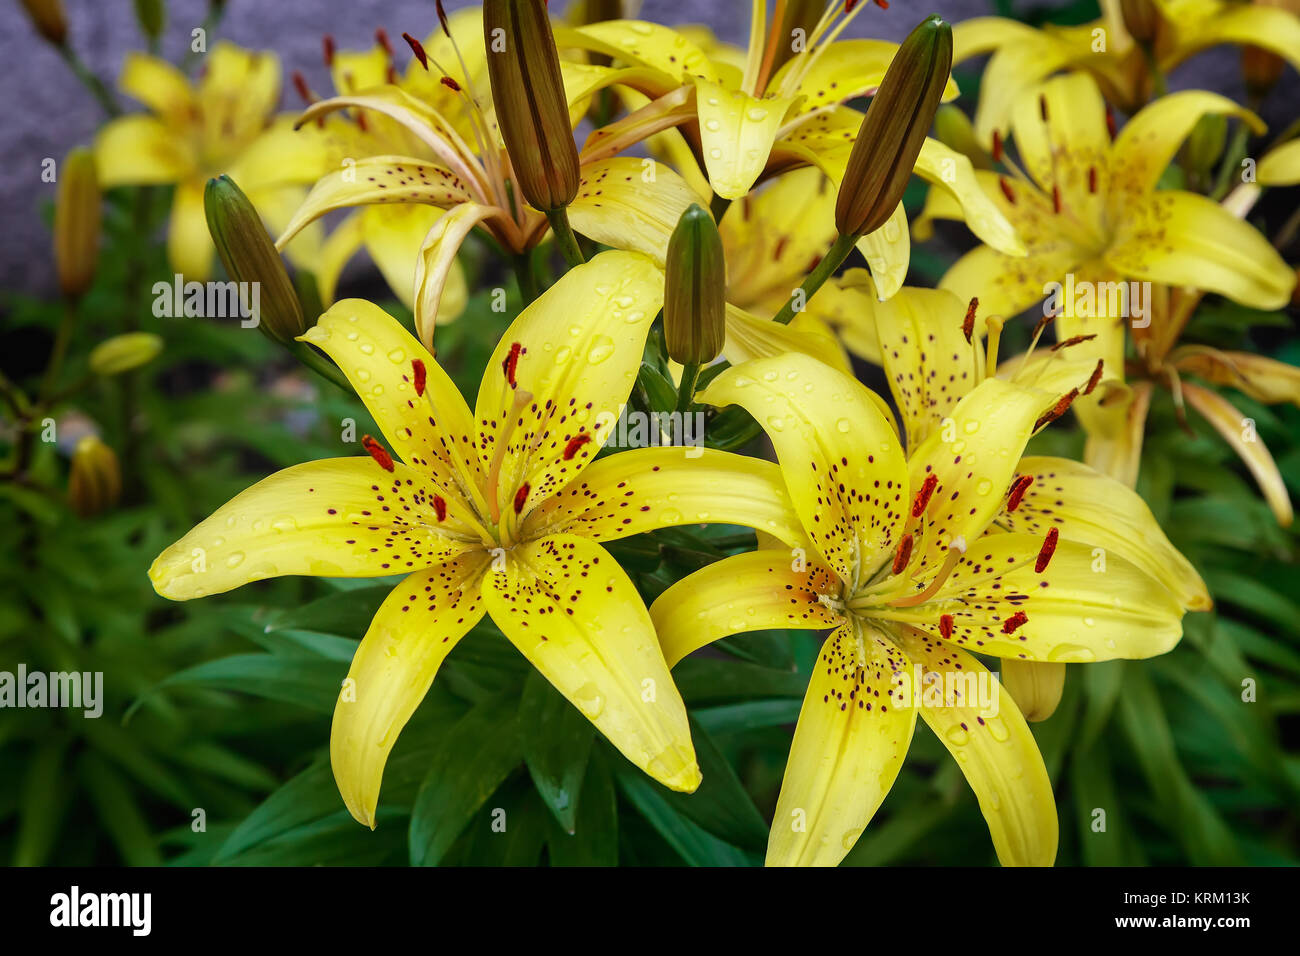 Yellow lilies blossom among the leaves so green Stock Photo